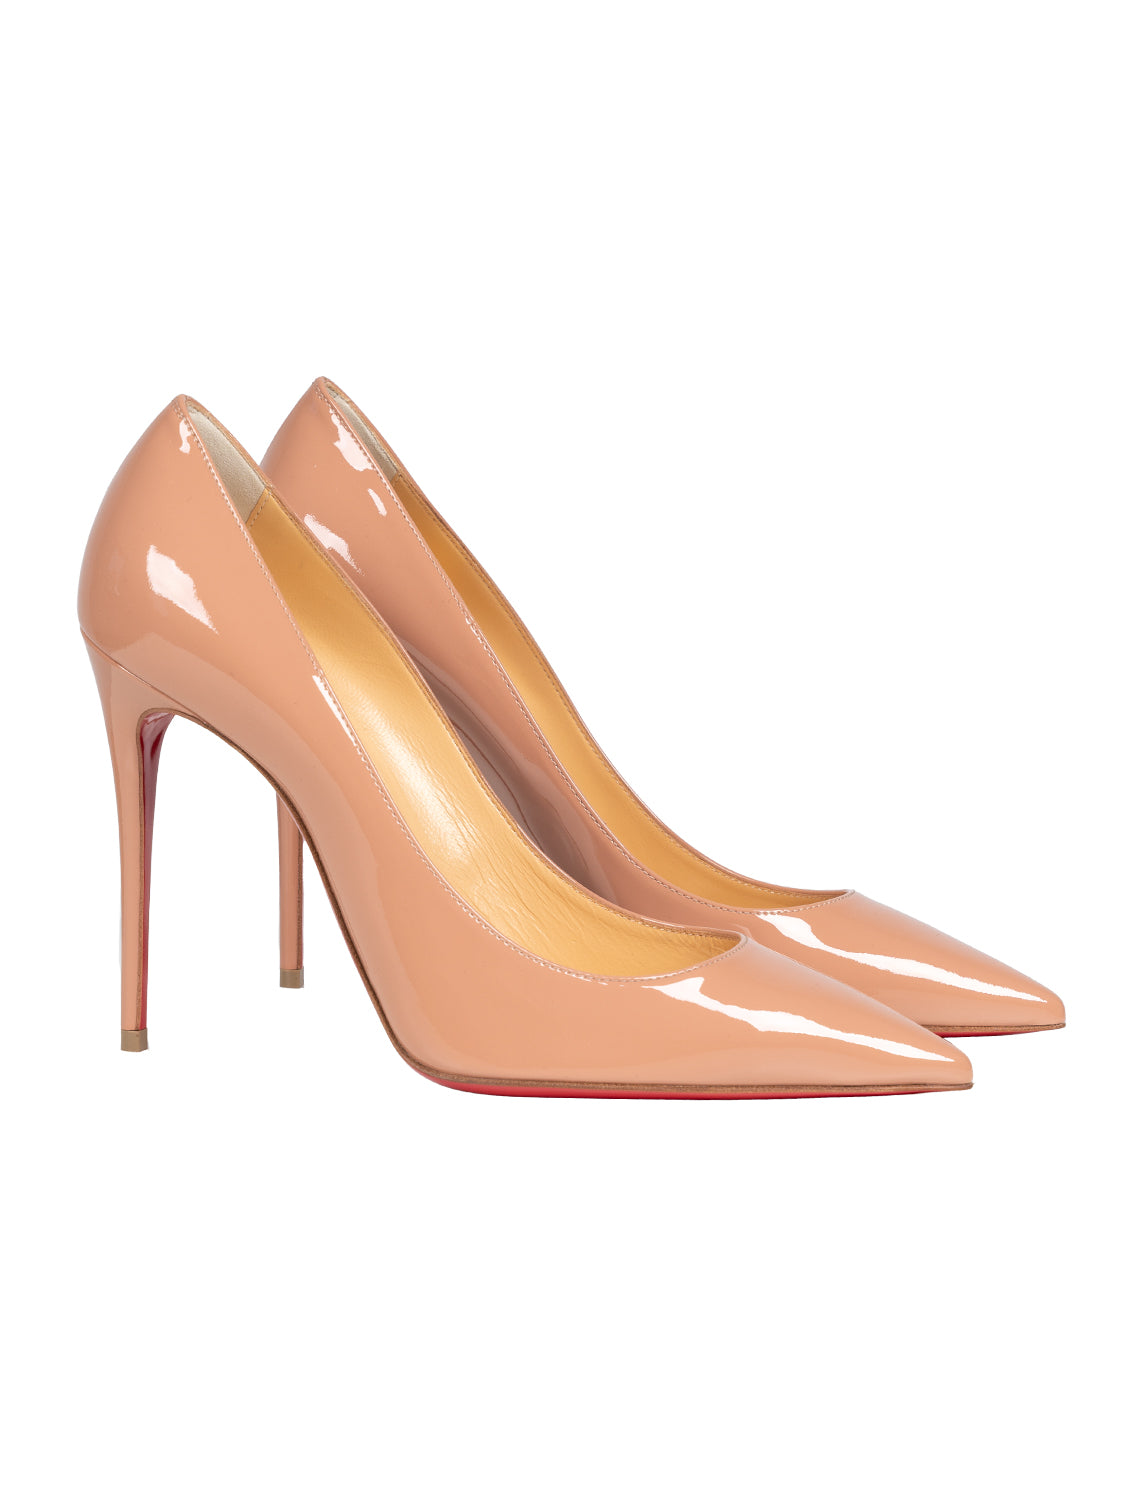 Kate 100 mm Patent Pumps - Nude